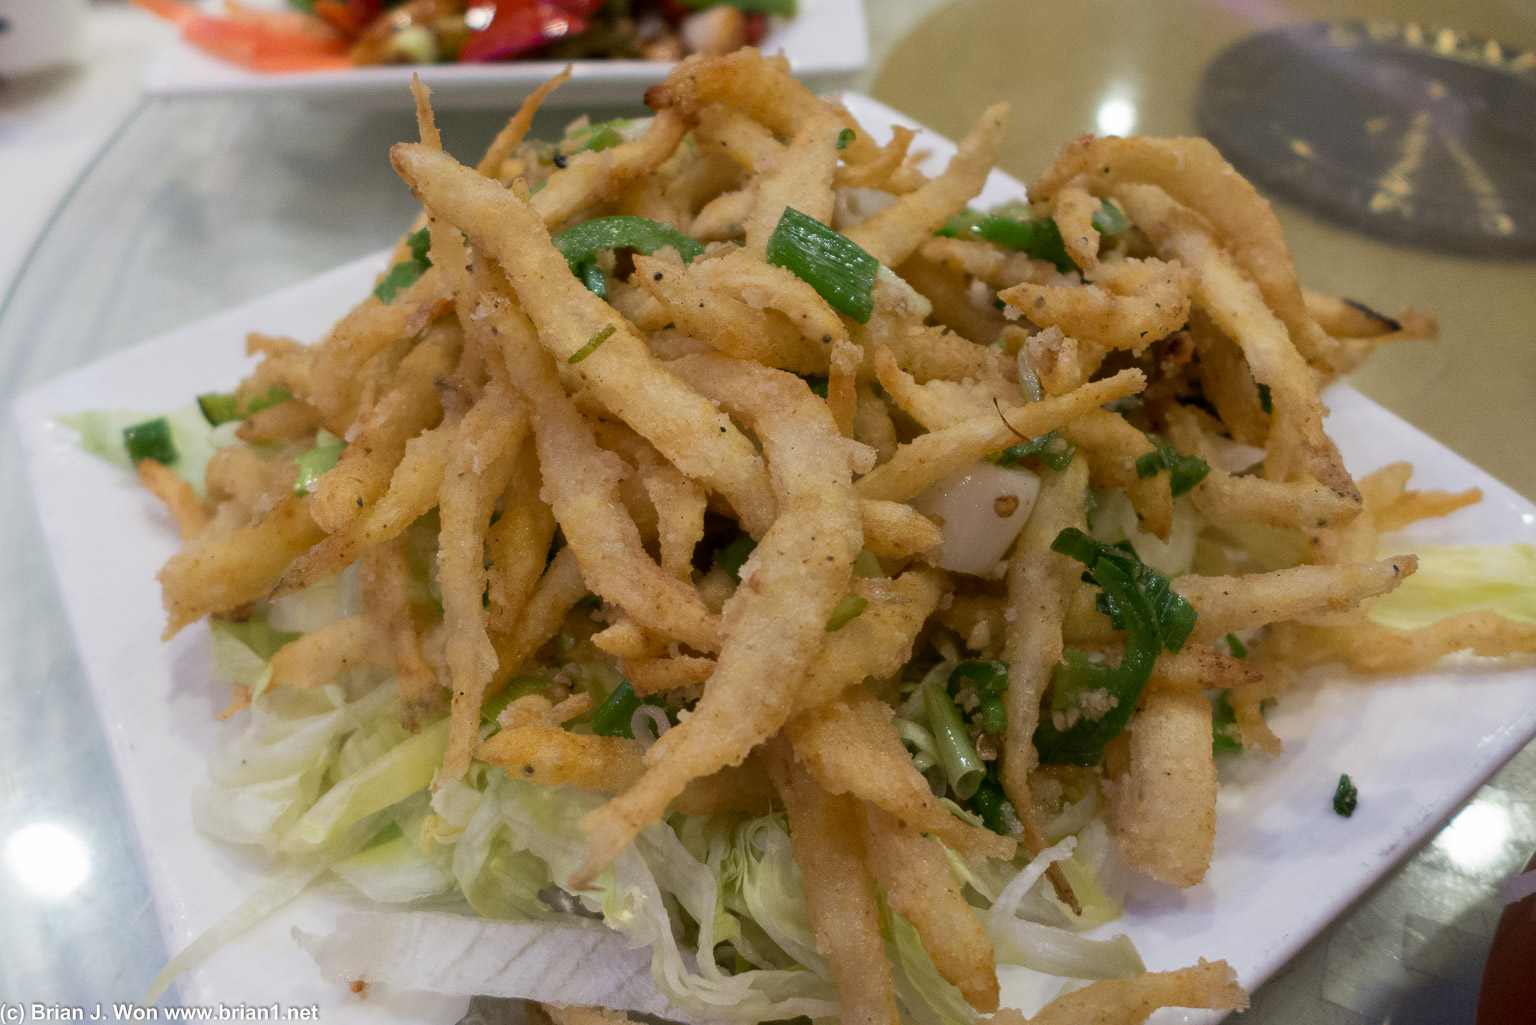 Deep fried fish. Not quite what we expected, but pretty good.